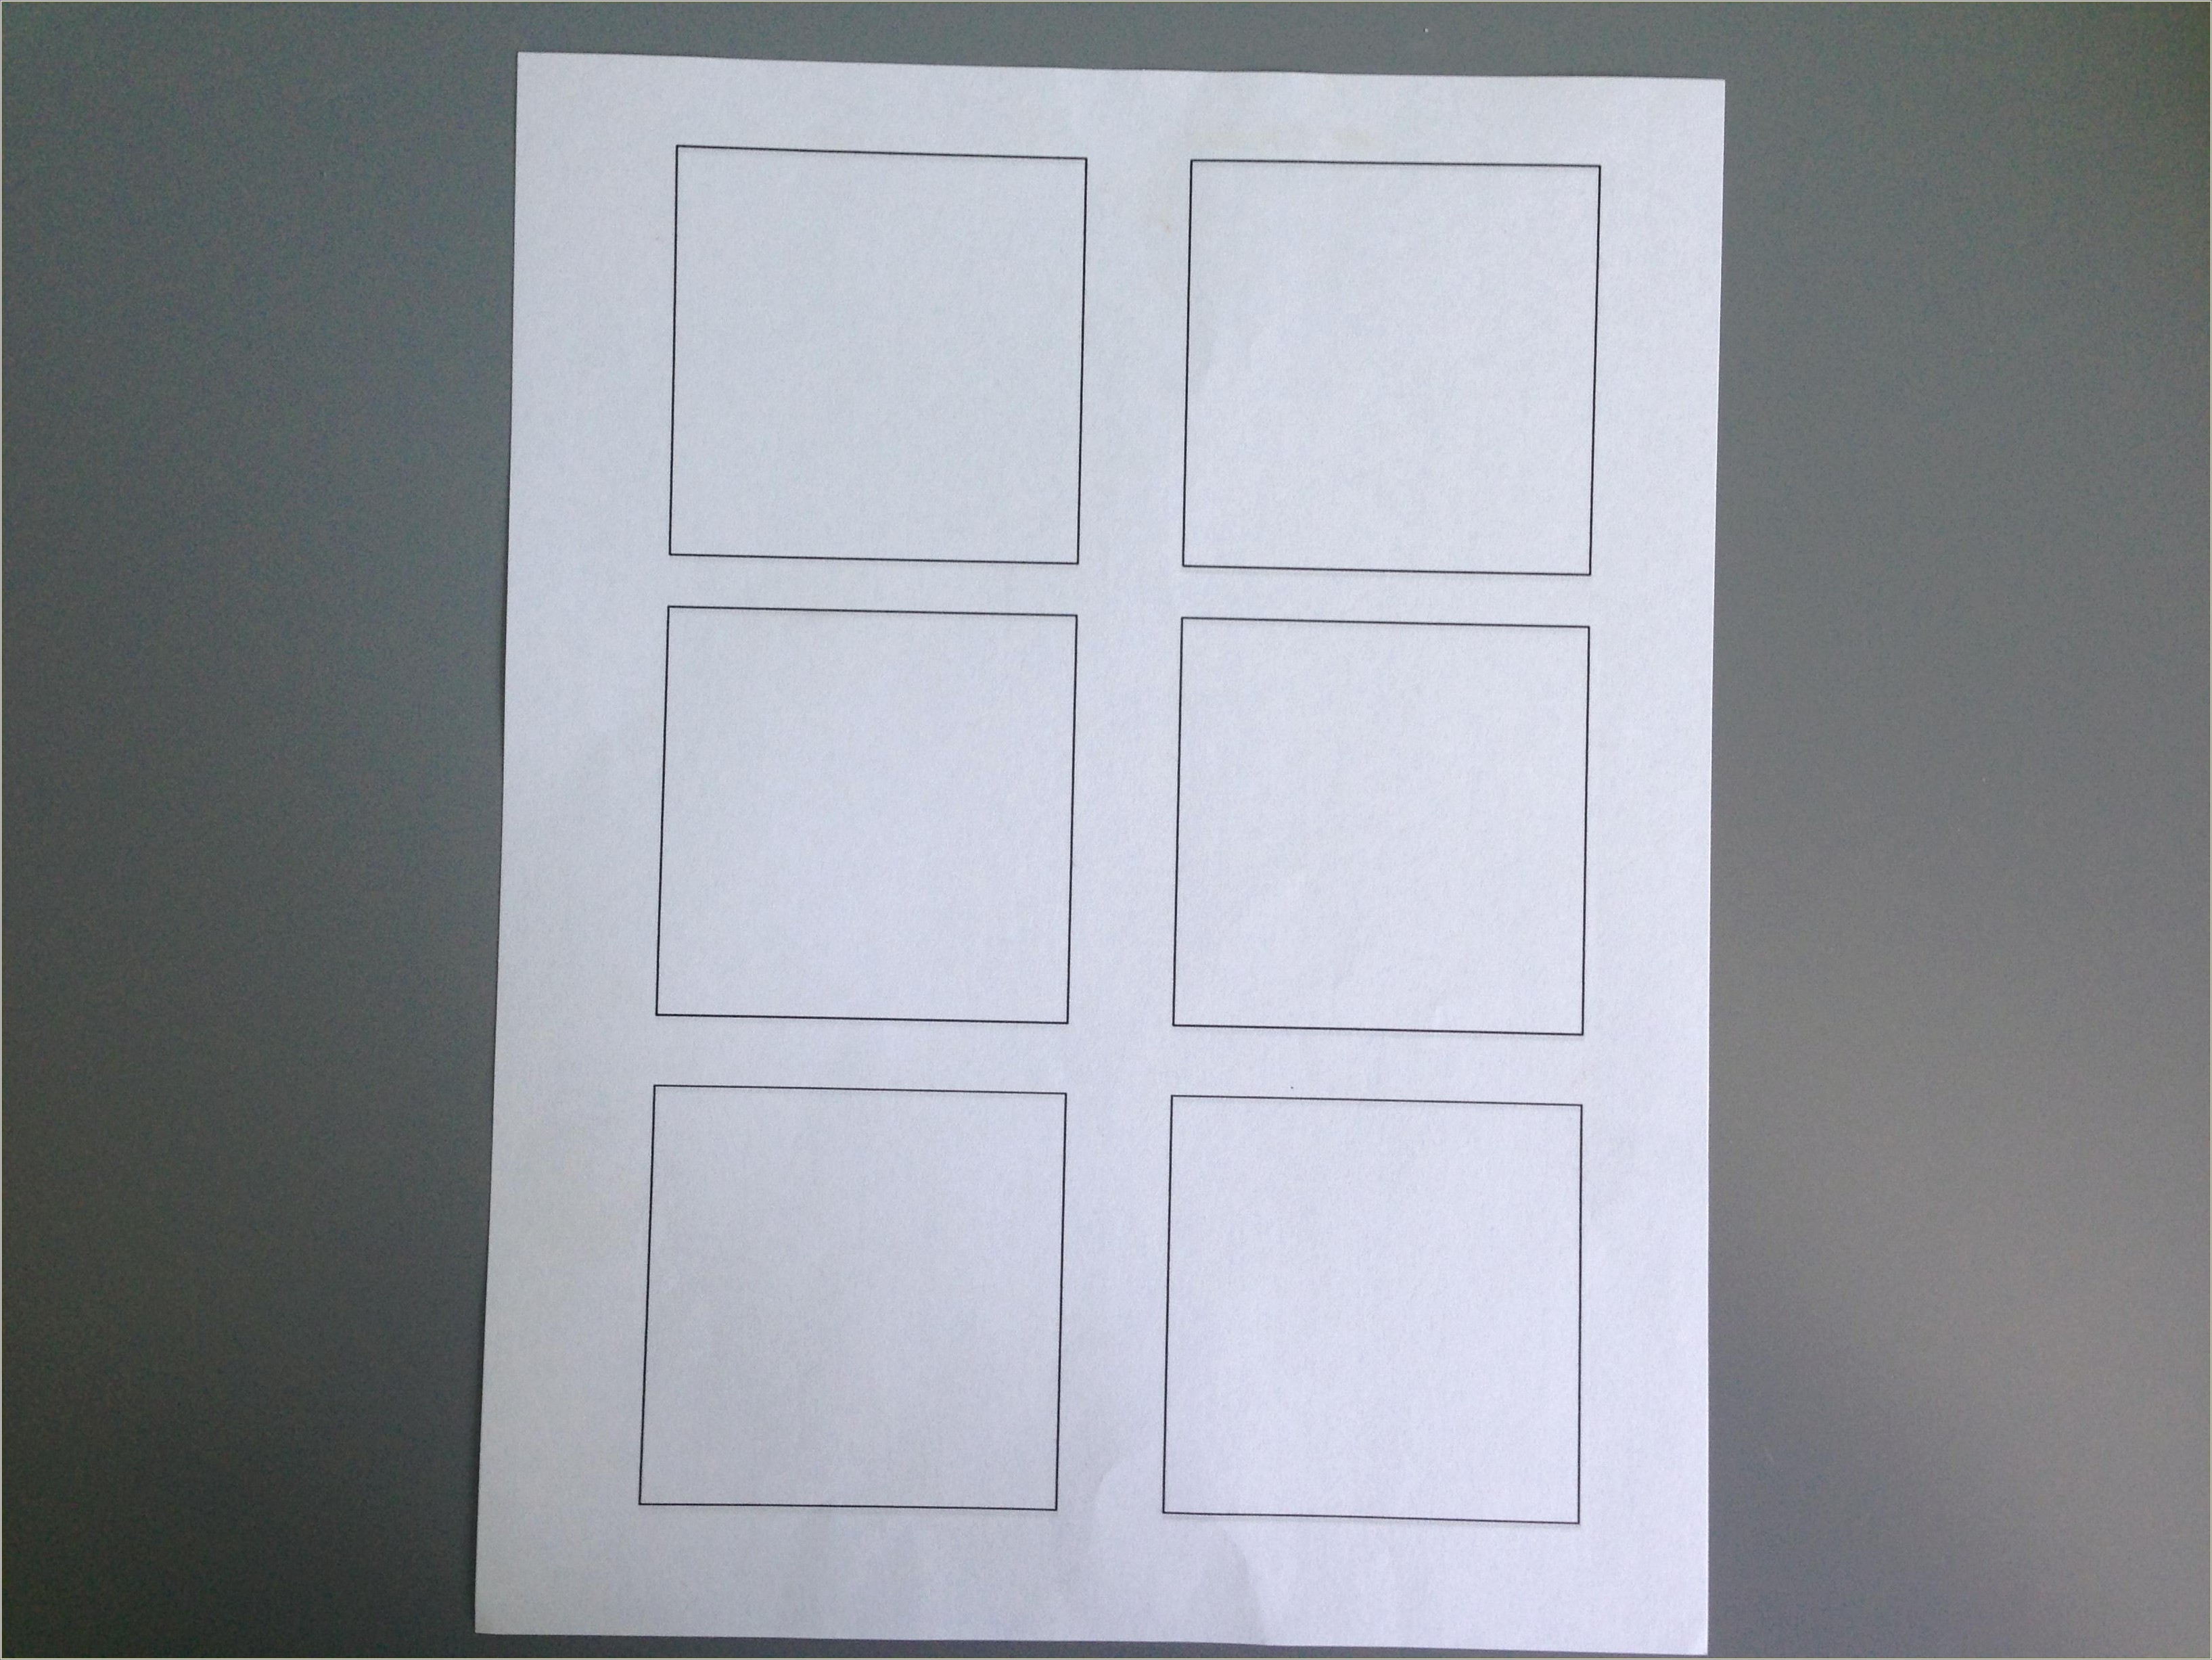 Free Template To Print On Post It Notes